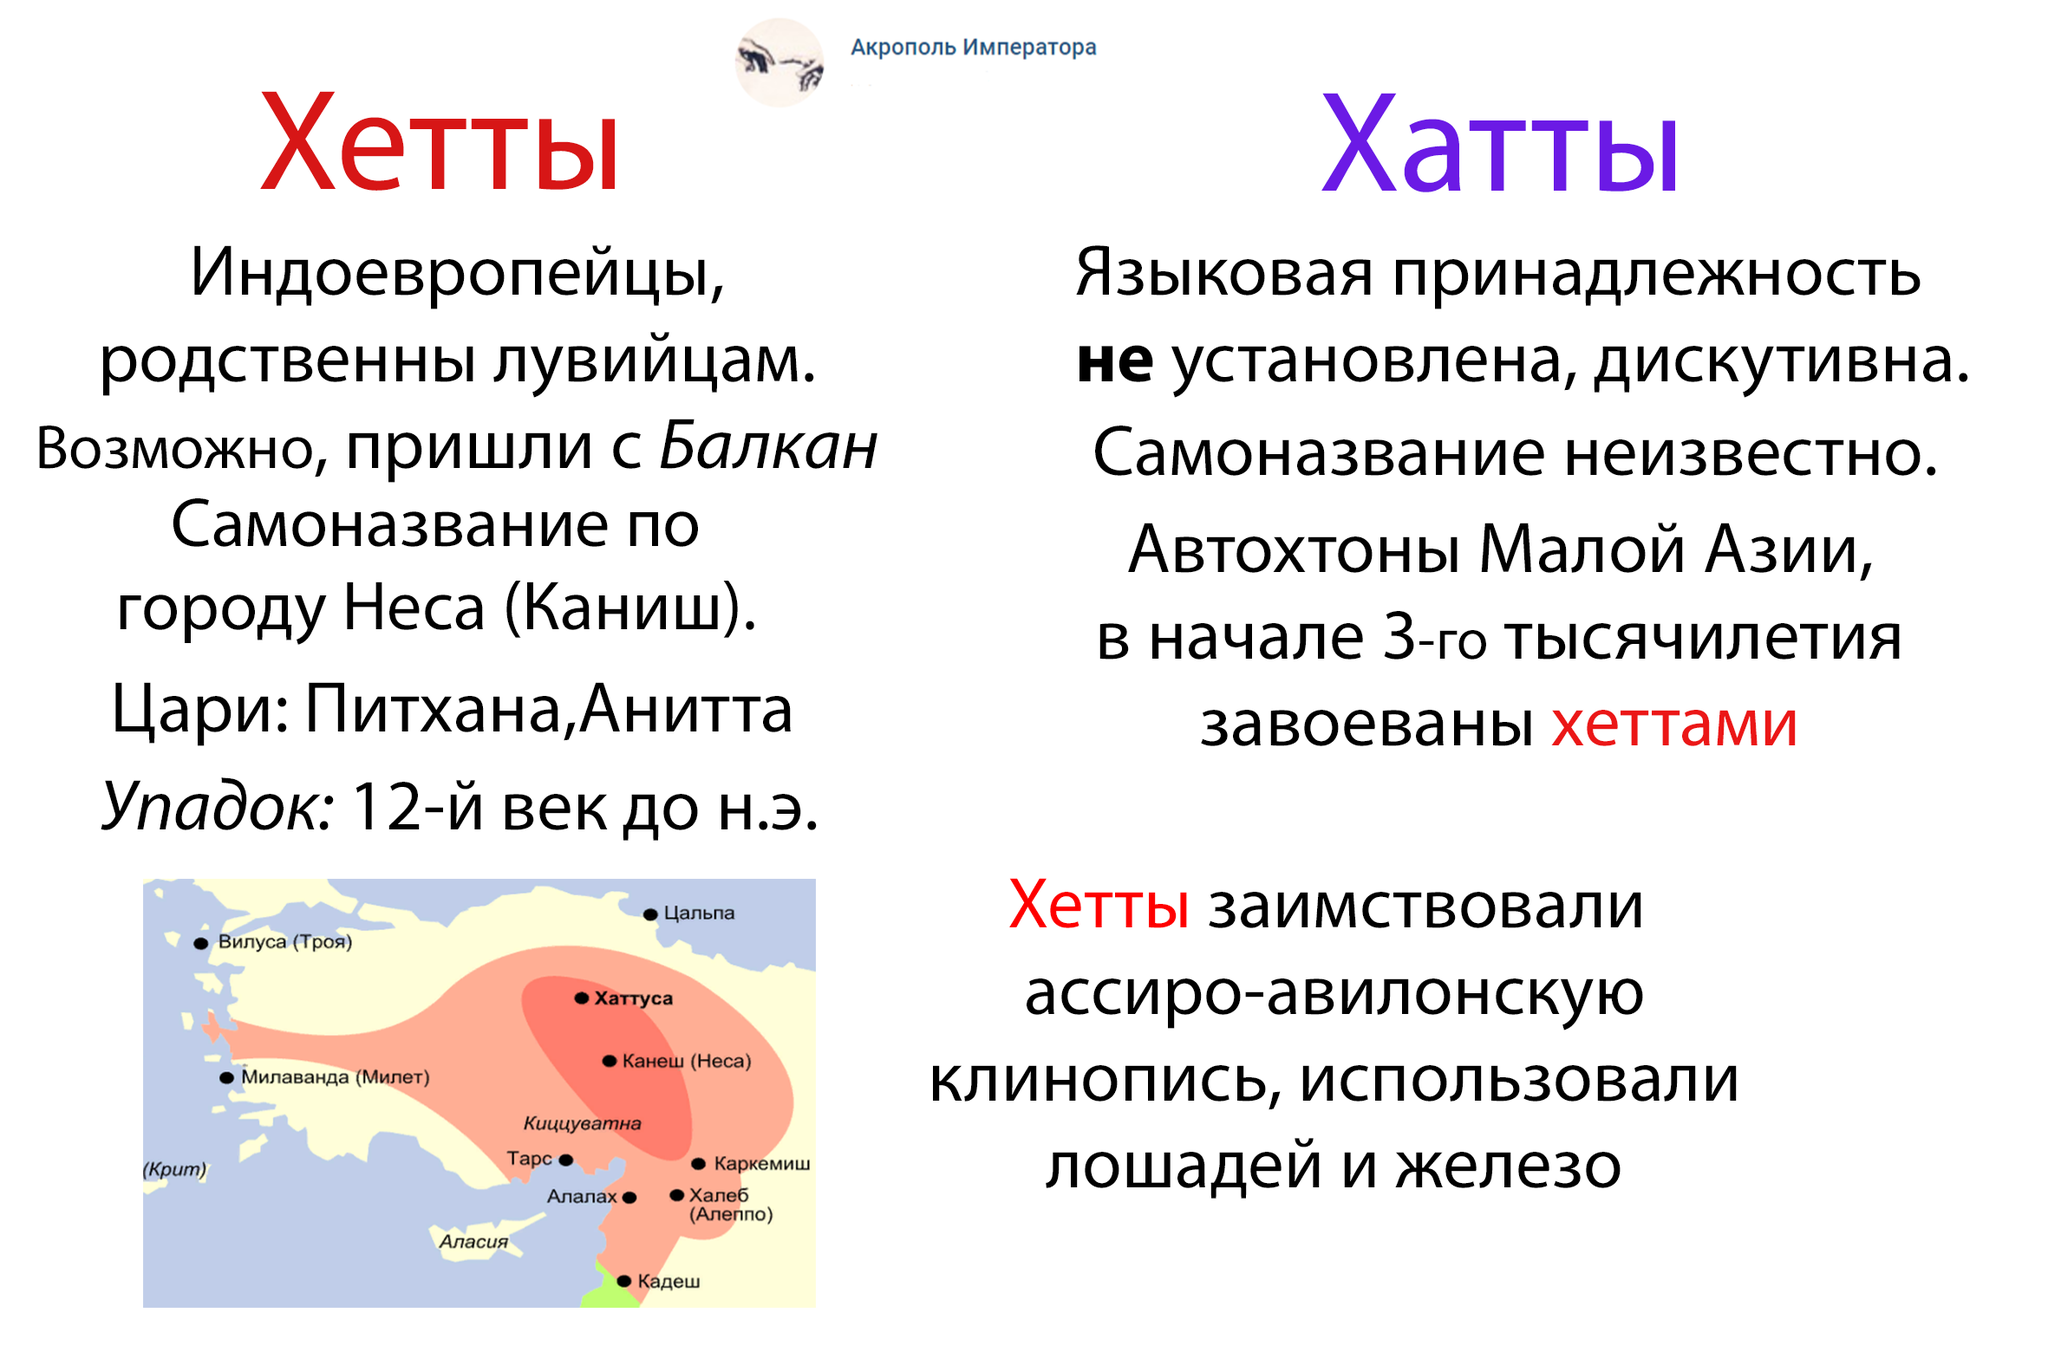 Difference between Hittites and Hattites - Hittites, The Hutts, People, Story, Differences, Asia Minor